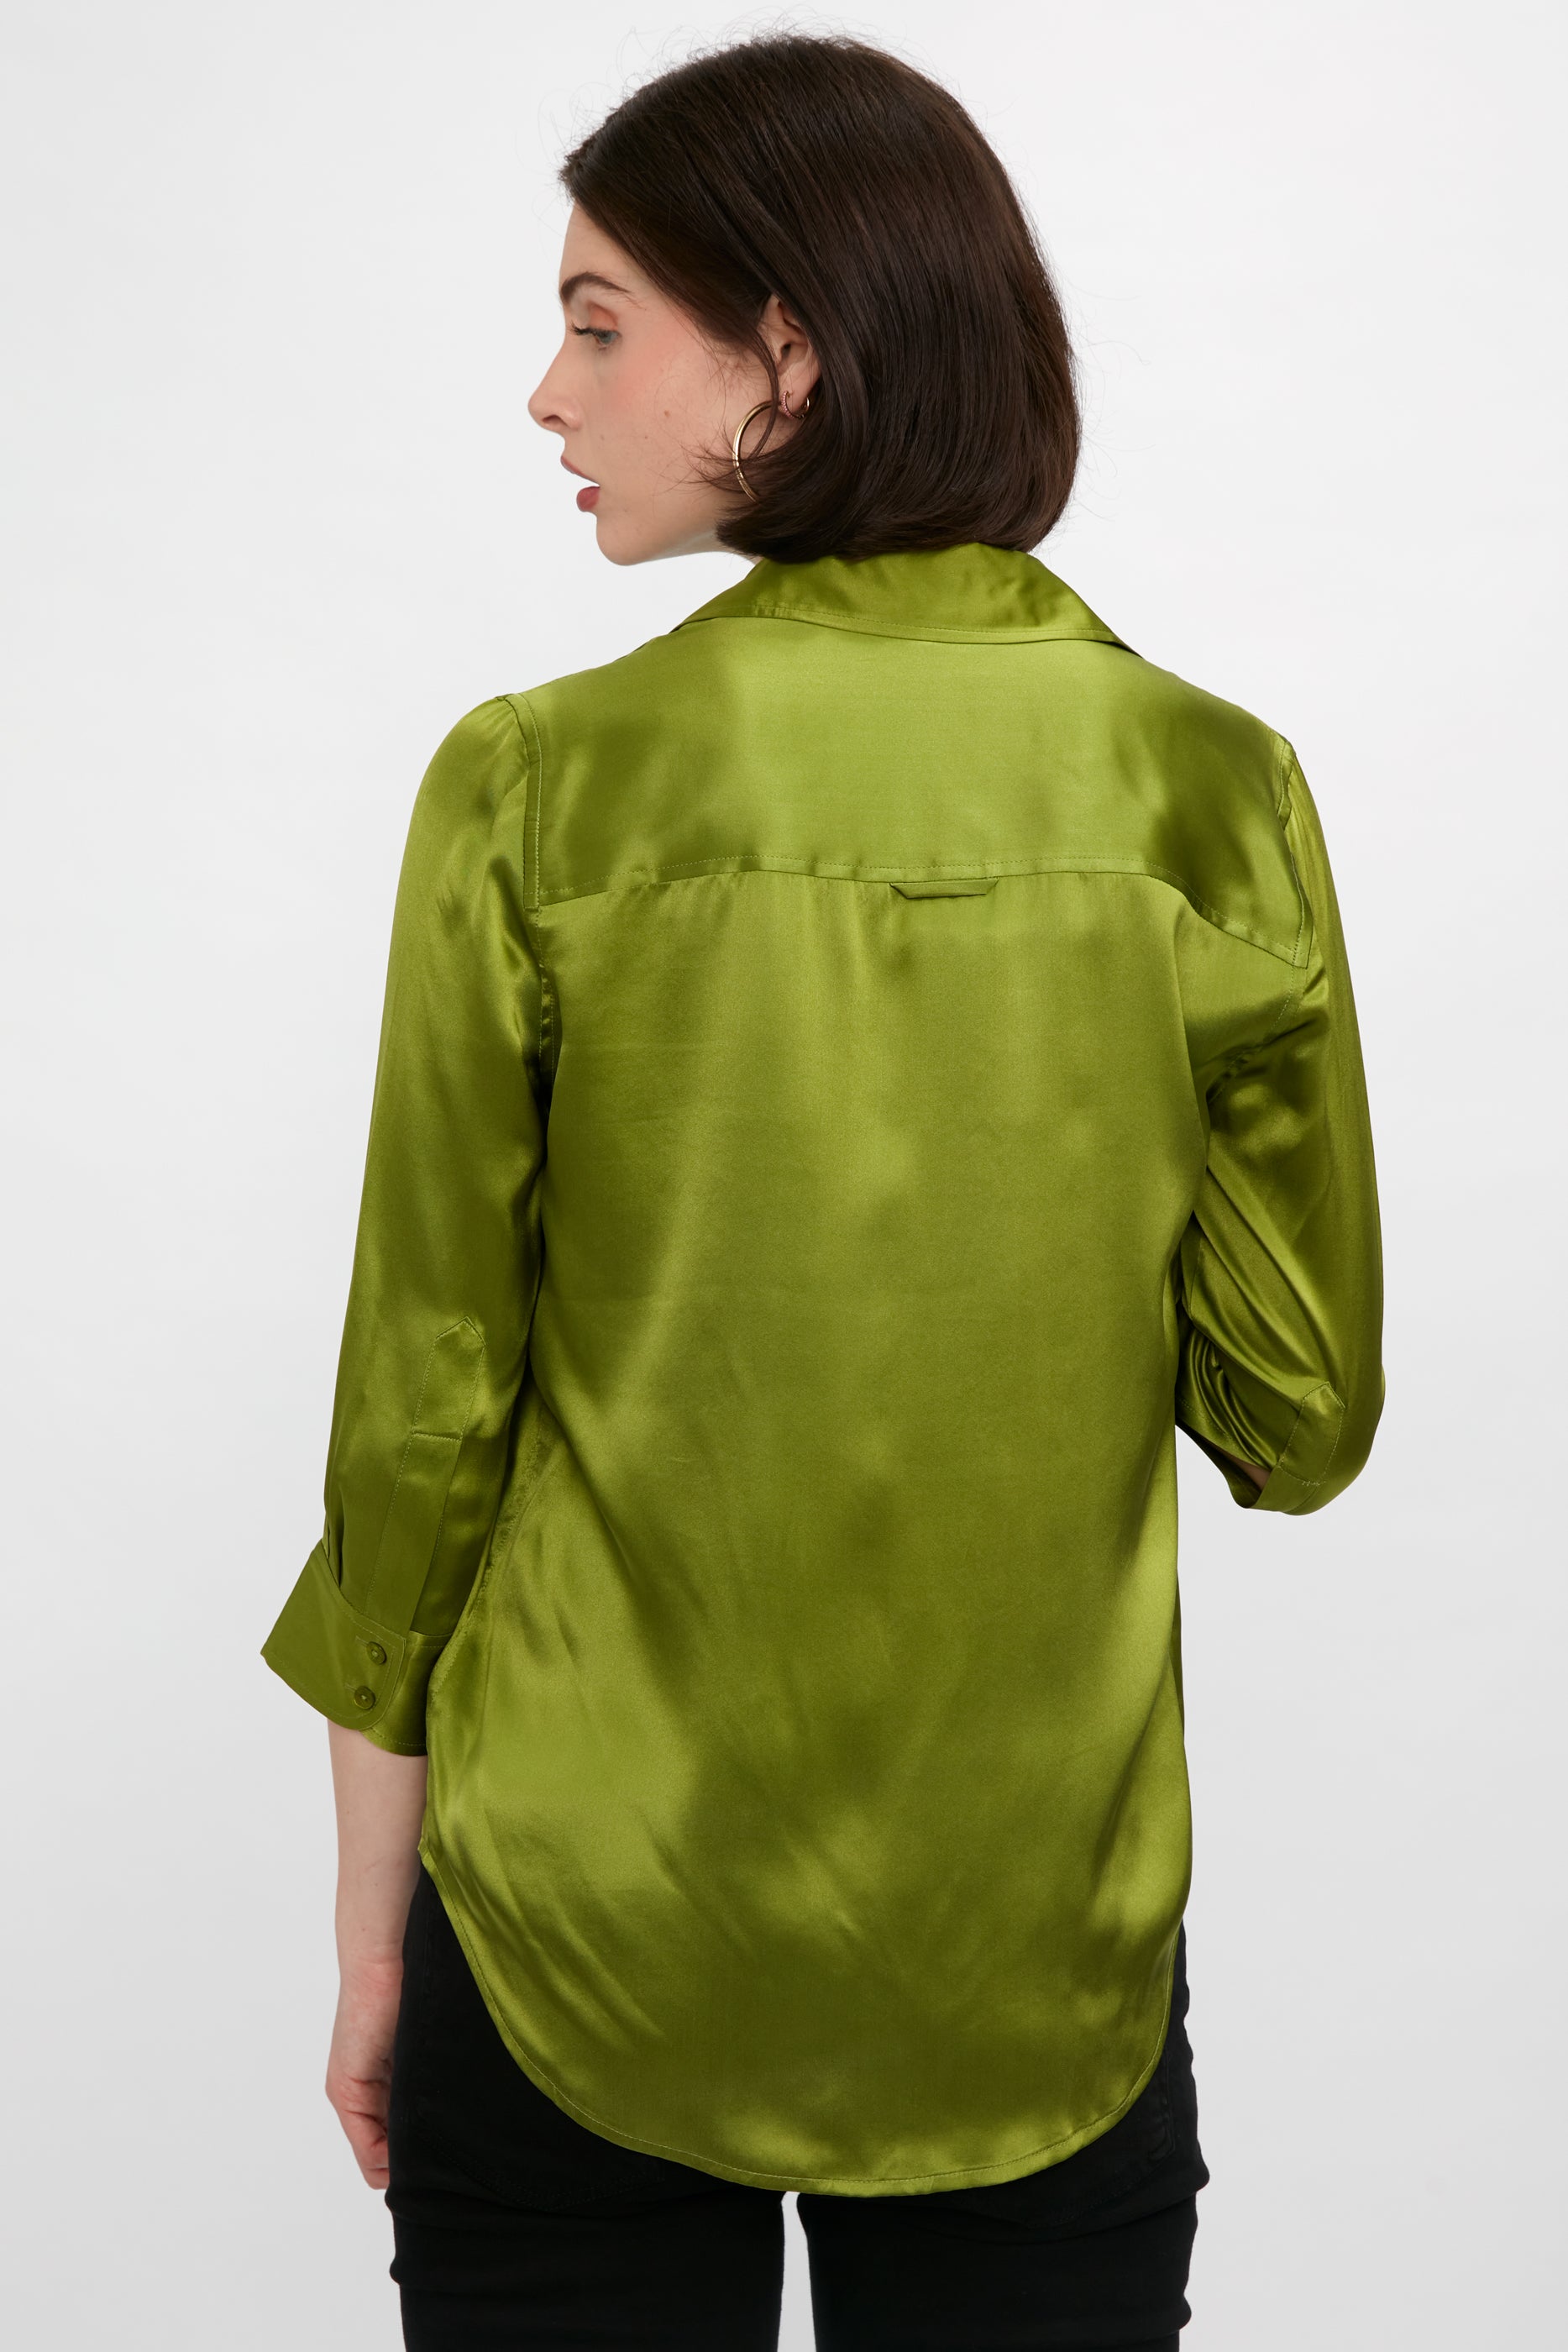 L'AGENCE Dani Blouse in English Ivy